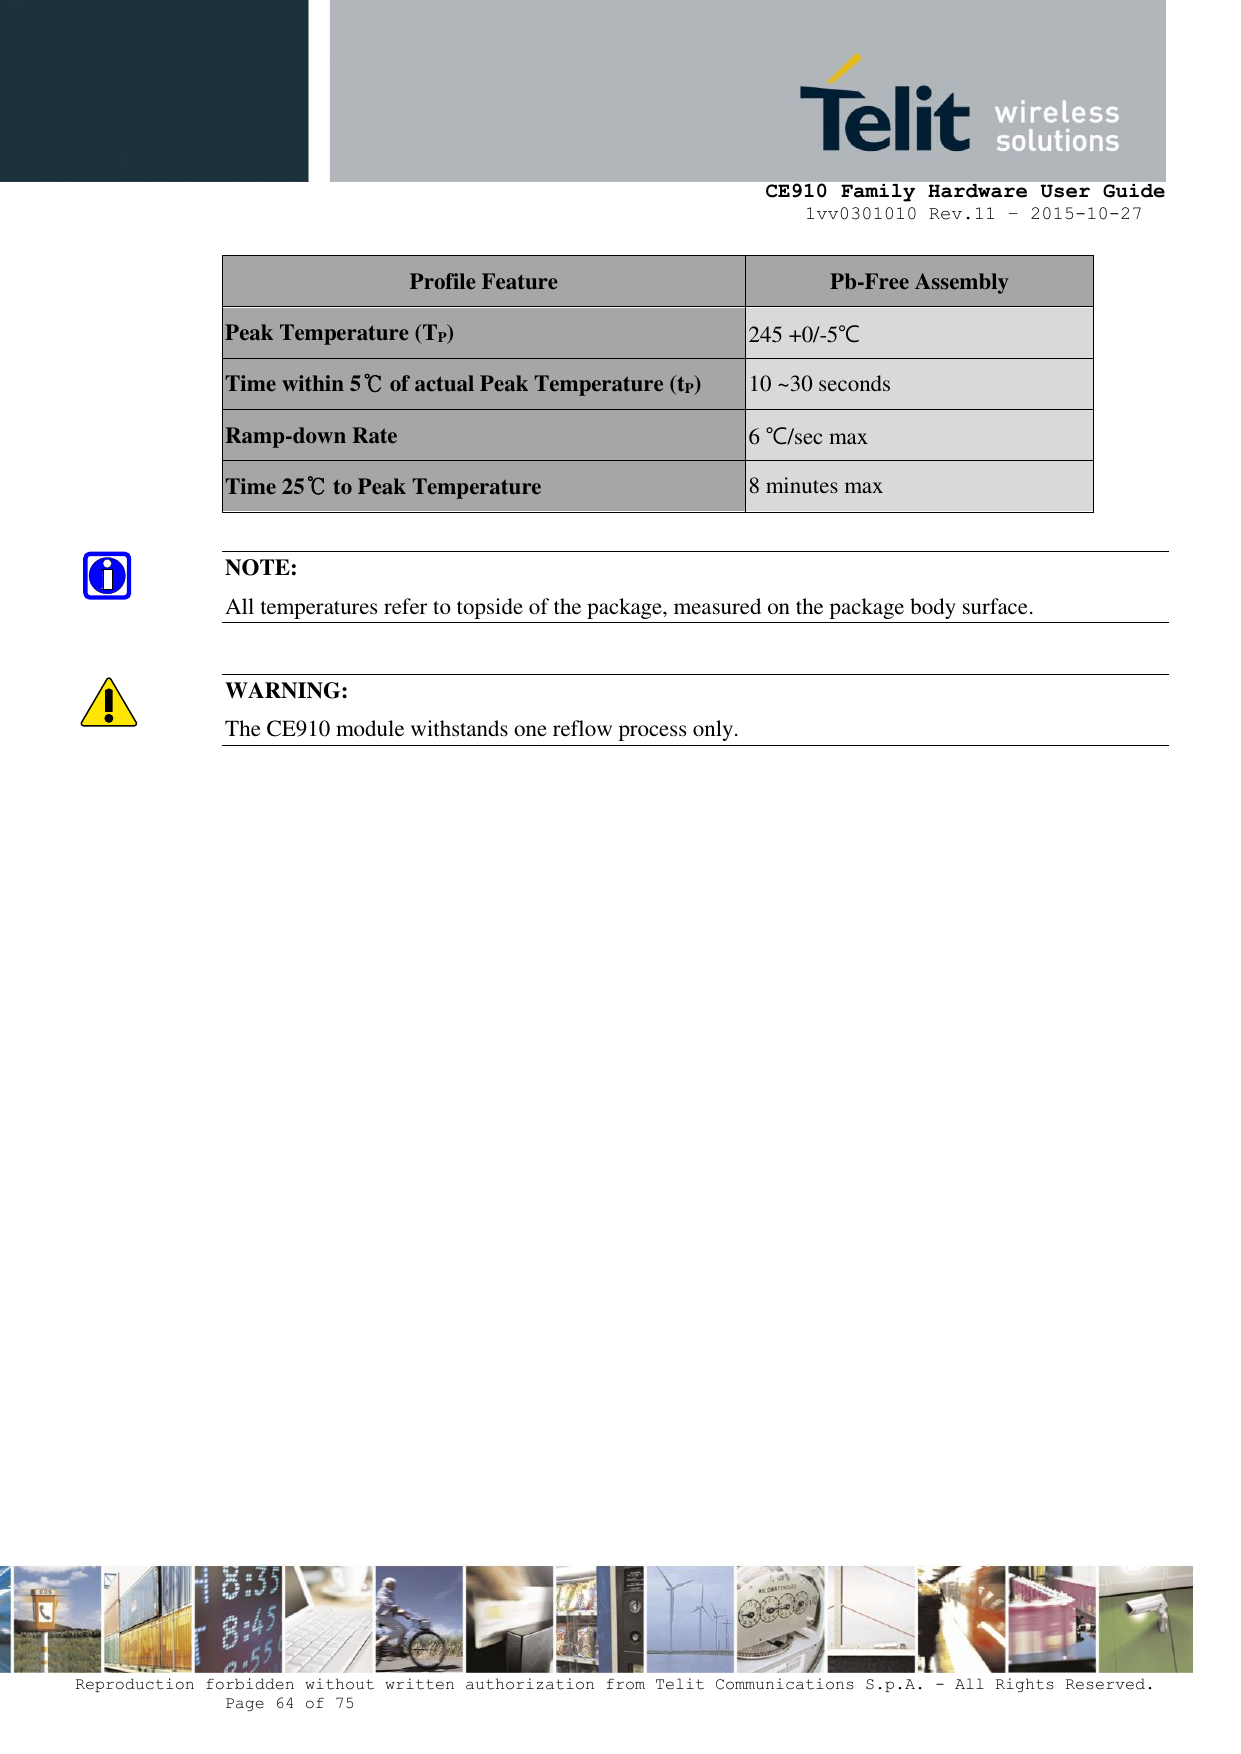     CE910 Family Hardware User Guide 1vv0301010 Rev.11 – 2015-10-27 Reproduction forbidden without written authorization from Telit Communications S.p.A. - All Rights Reserved.    Page 64 of 75                                                     Profile Feature Pb-Free Assembly Peak Temperature (TP) 245 +0/-5℃ Time within 5℃ of actual Peak Temperature (tP) 10 ~30 seconds Ramp-down Rate 6 ℃/sec max Time 25℃ to Peak Temperature 8 minutes max  NOTE: All temperatures refer to topside of the package, measured on the package body surface.  WARNING: The CE910 module withstands one reflow process only.  